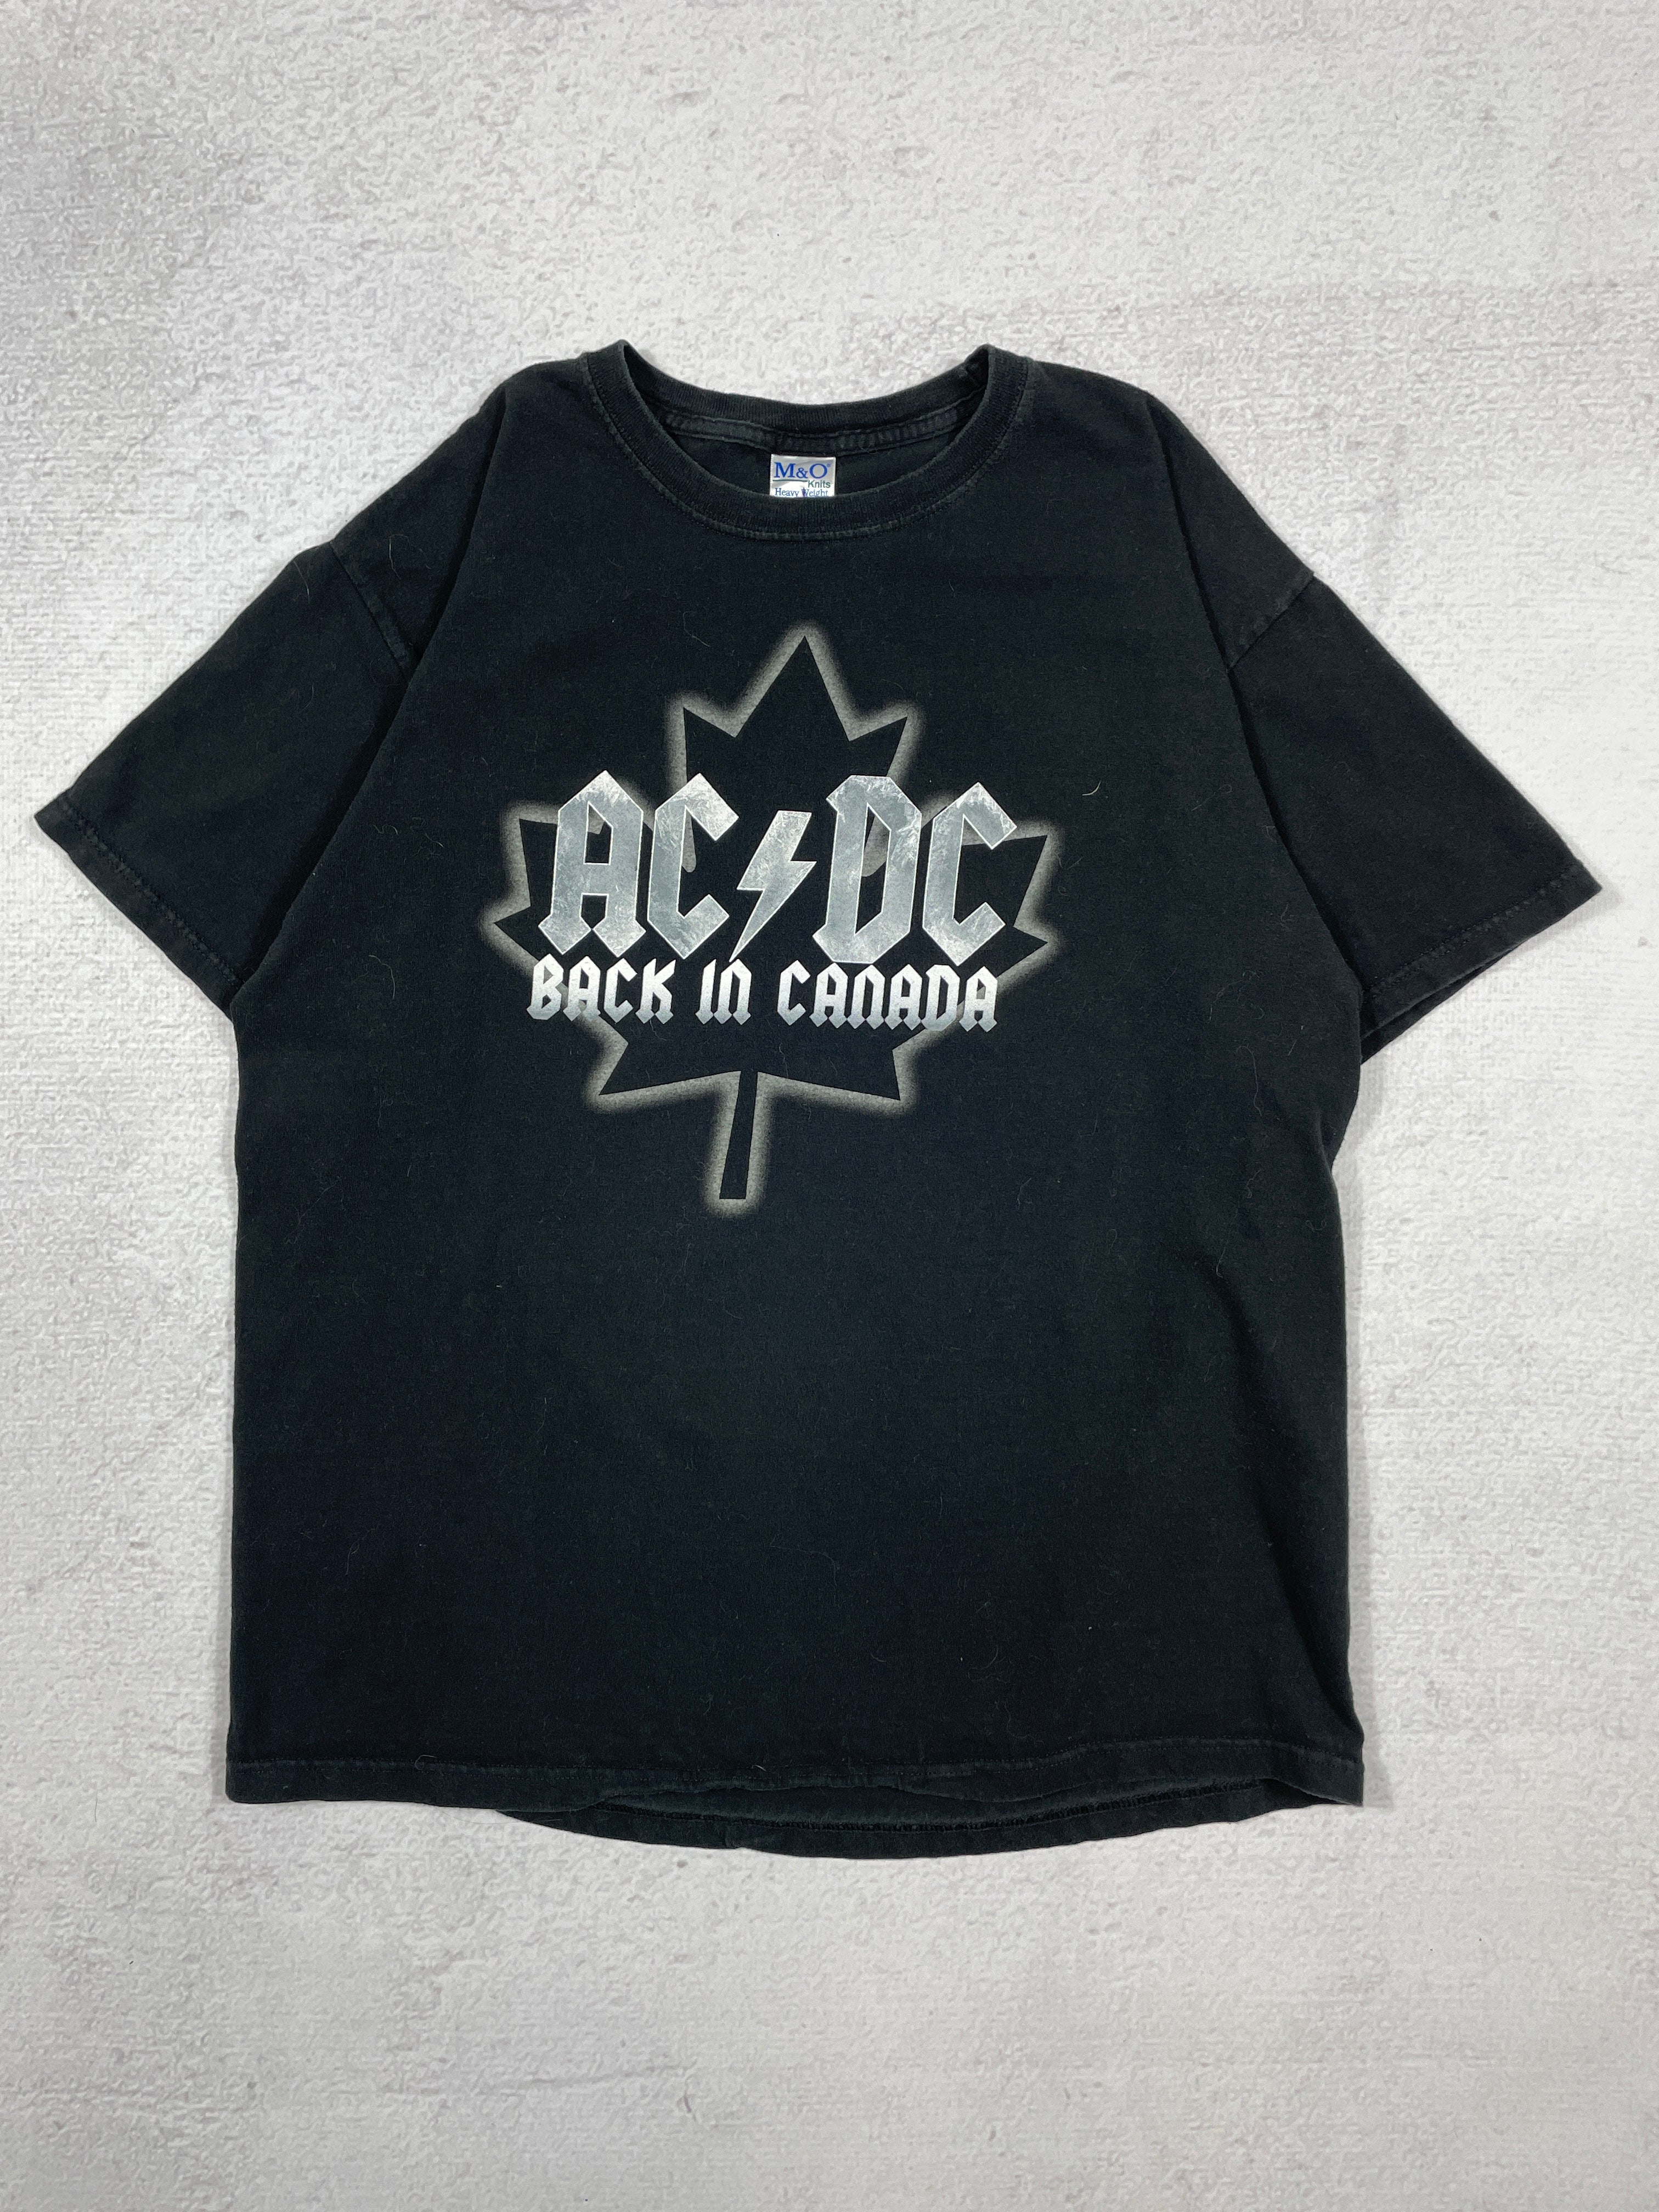 Music AC/DC Back in Canada Tour T-Shirt - Men's Large